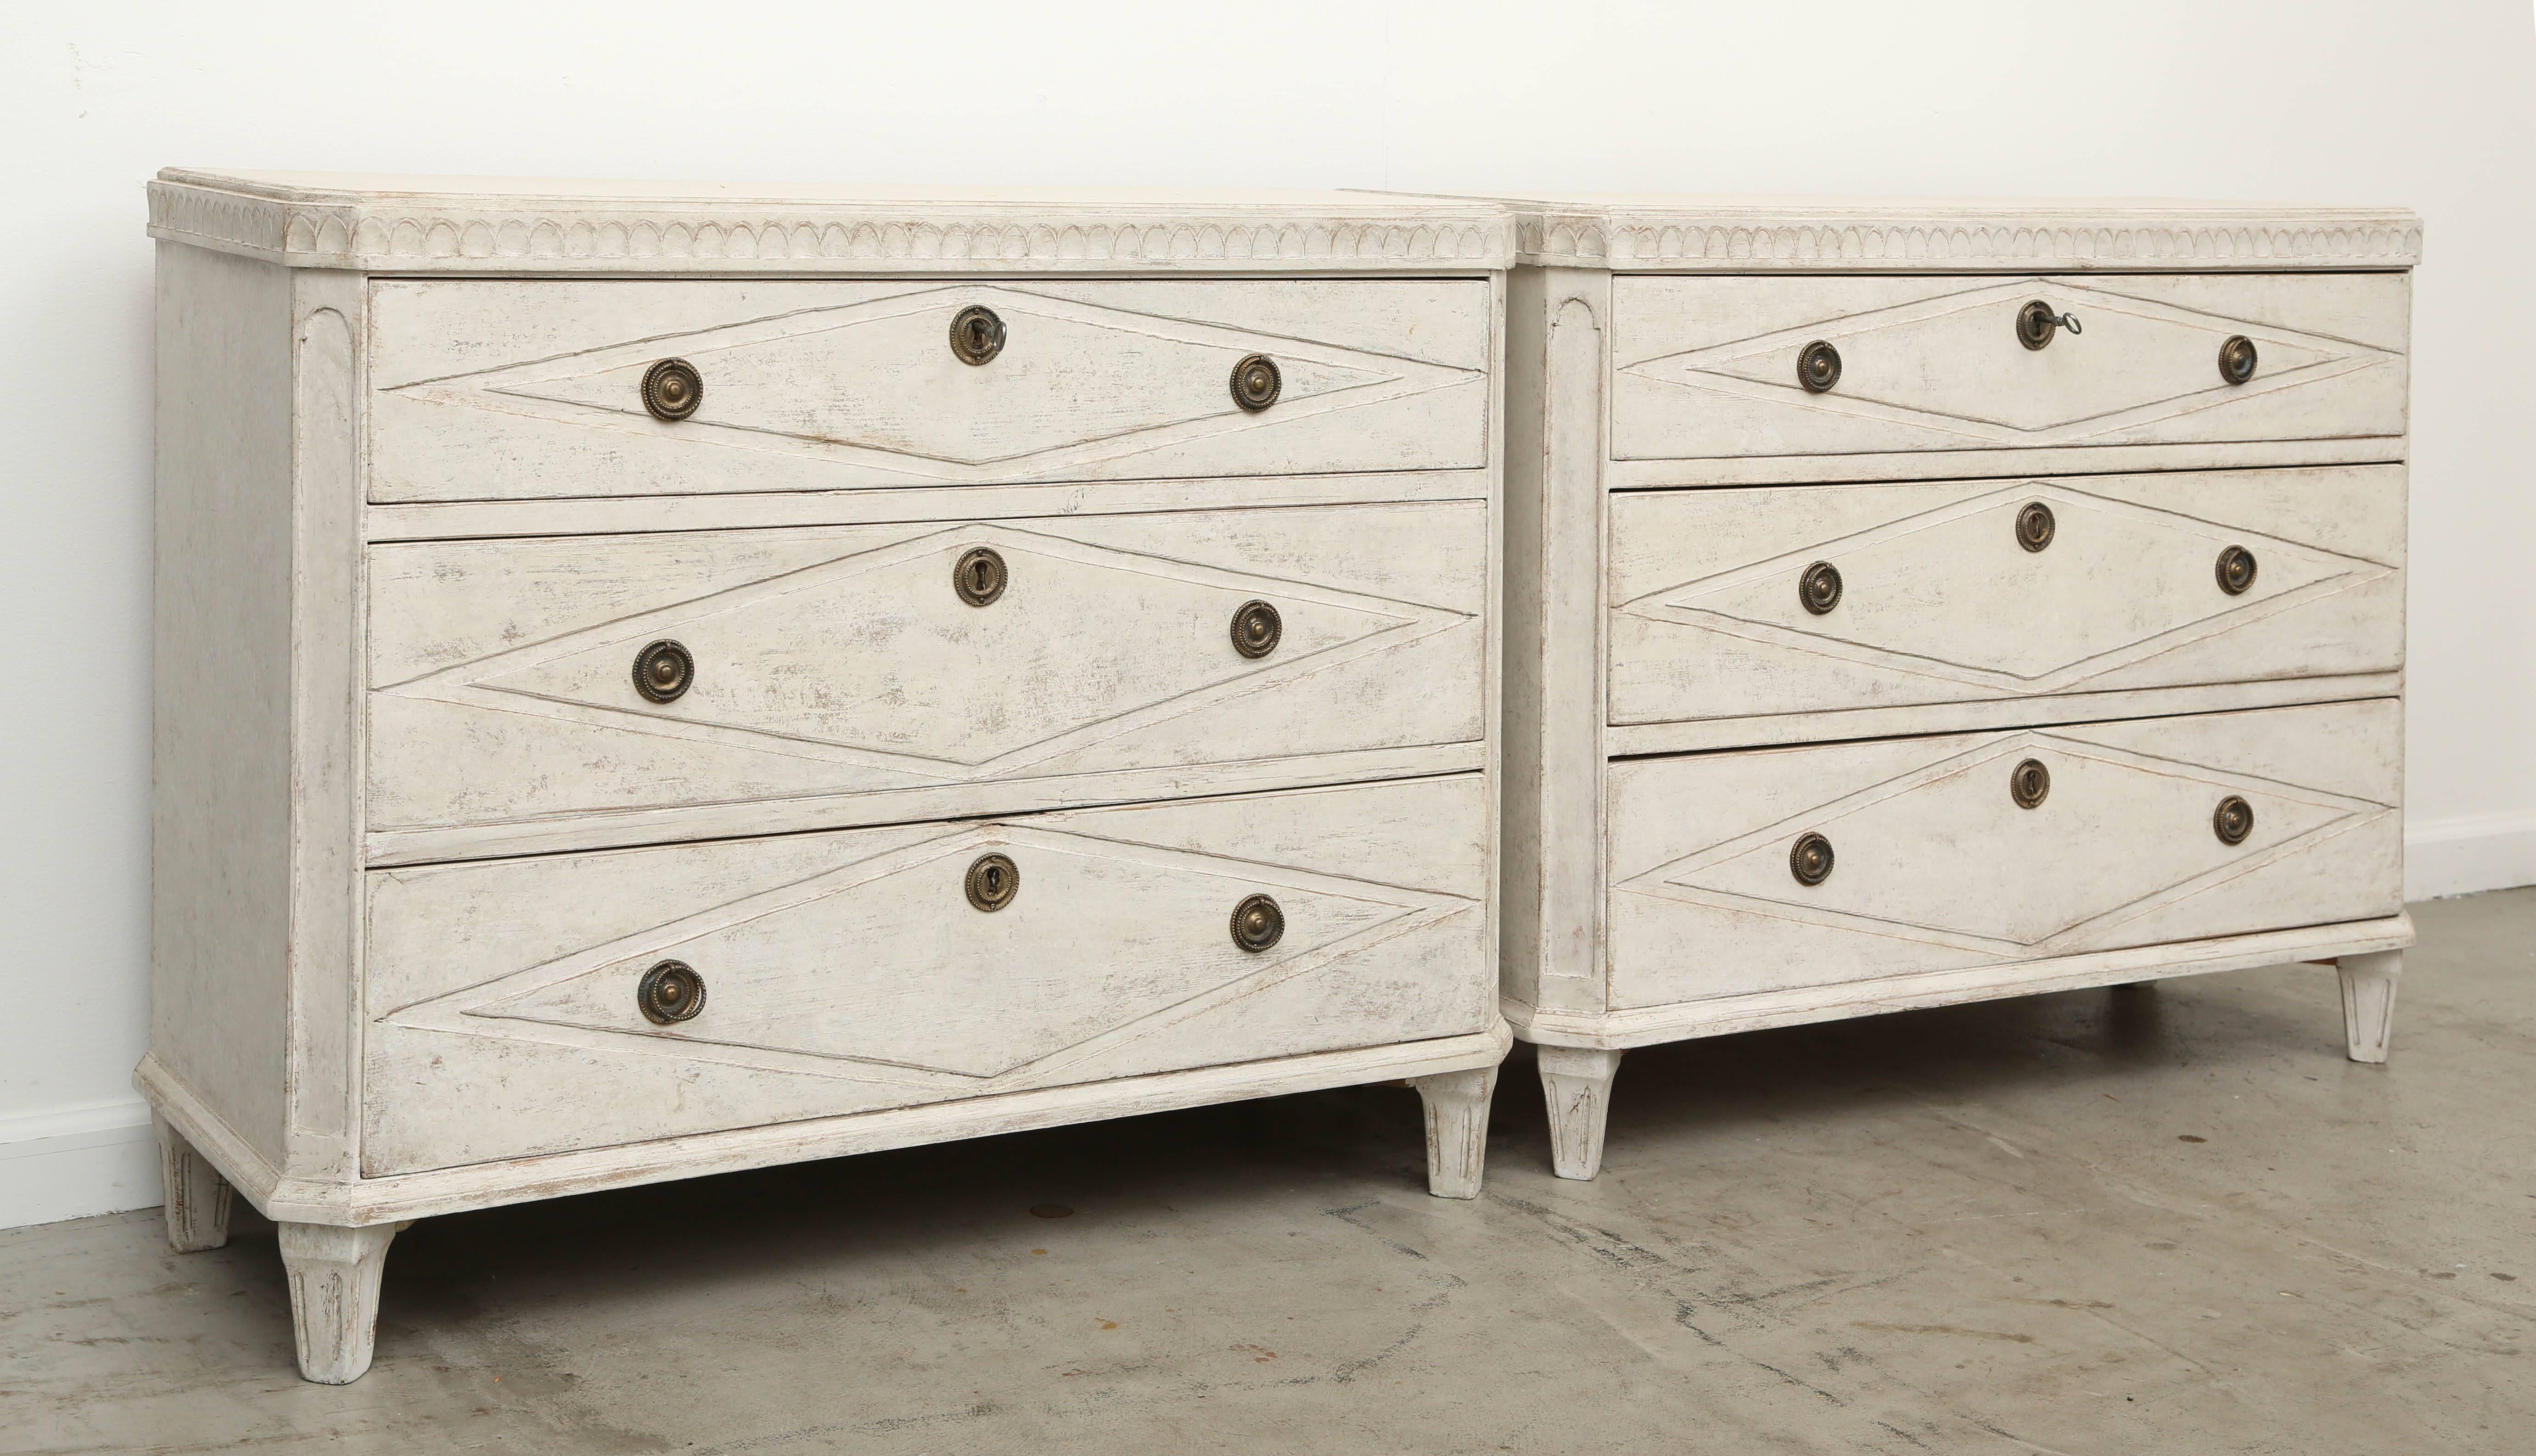 Painted Large Pair of Antique Swedish Gustavian Chests Diamond Carving Mid-19th Century